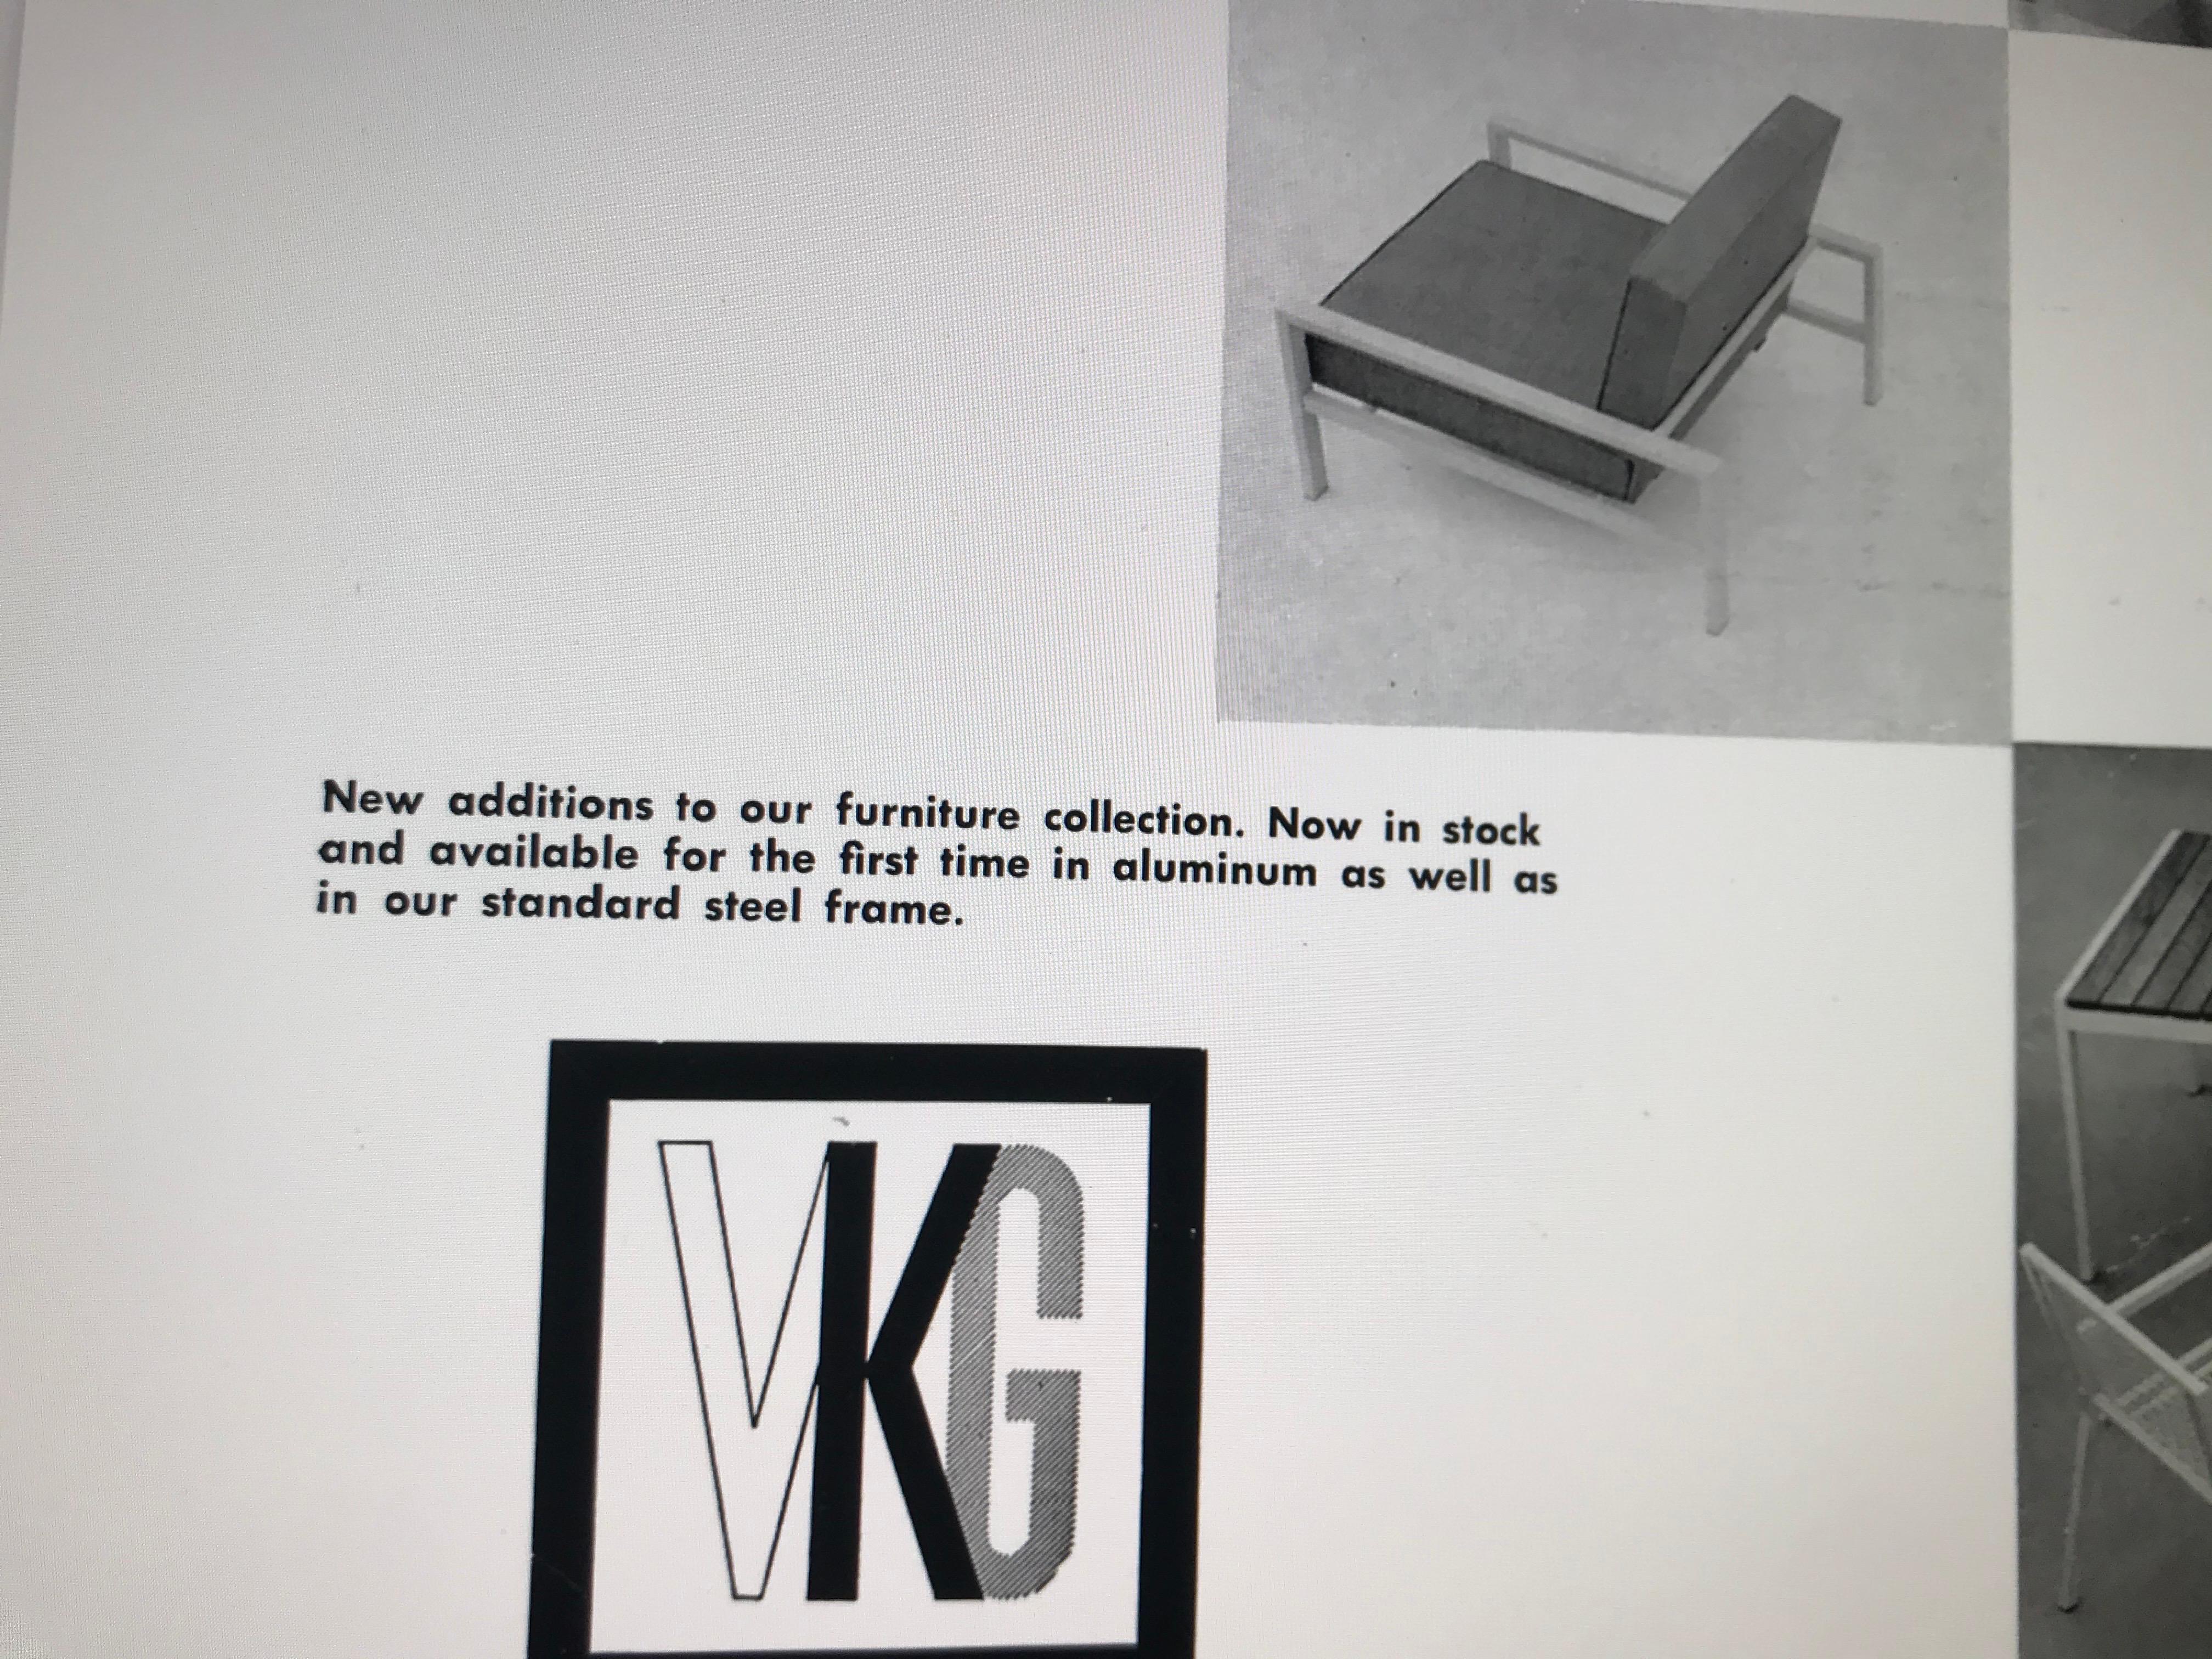 California design.
Limited.
VKG pieces were featured throughout the 